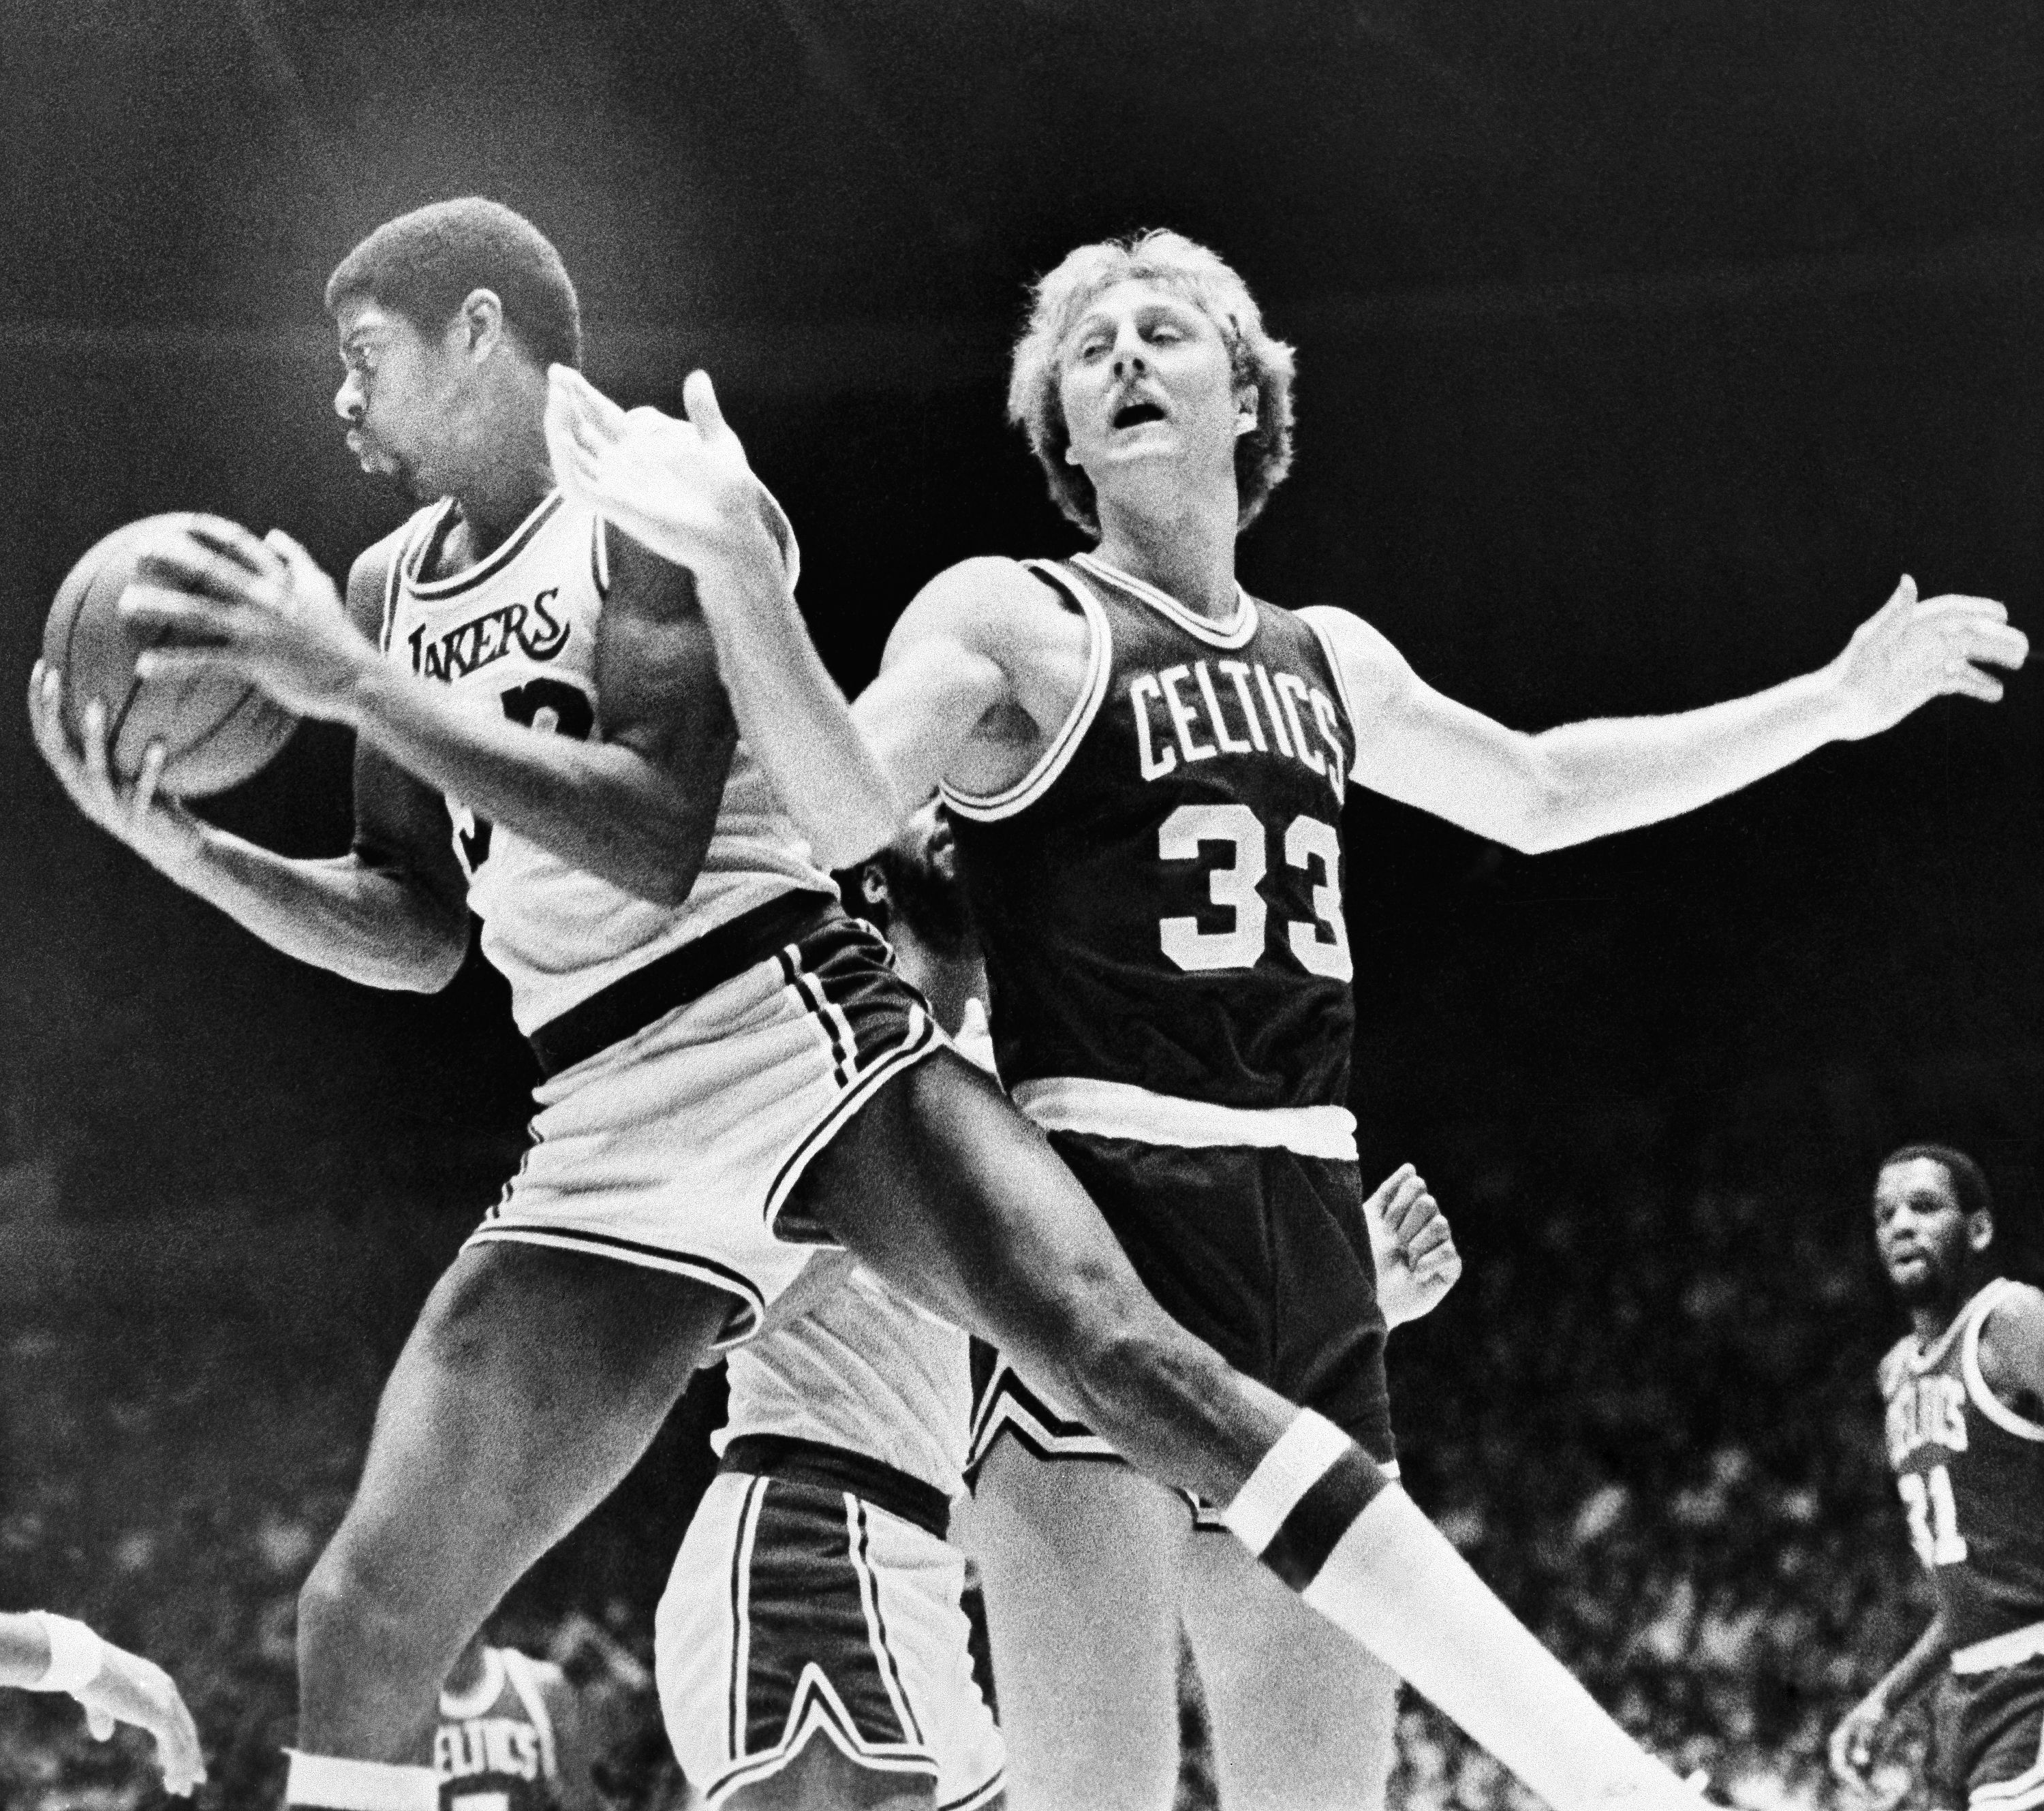 NBA 75: At No. 7, Larry Bird was a legendary all-around player who